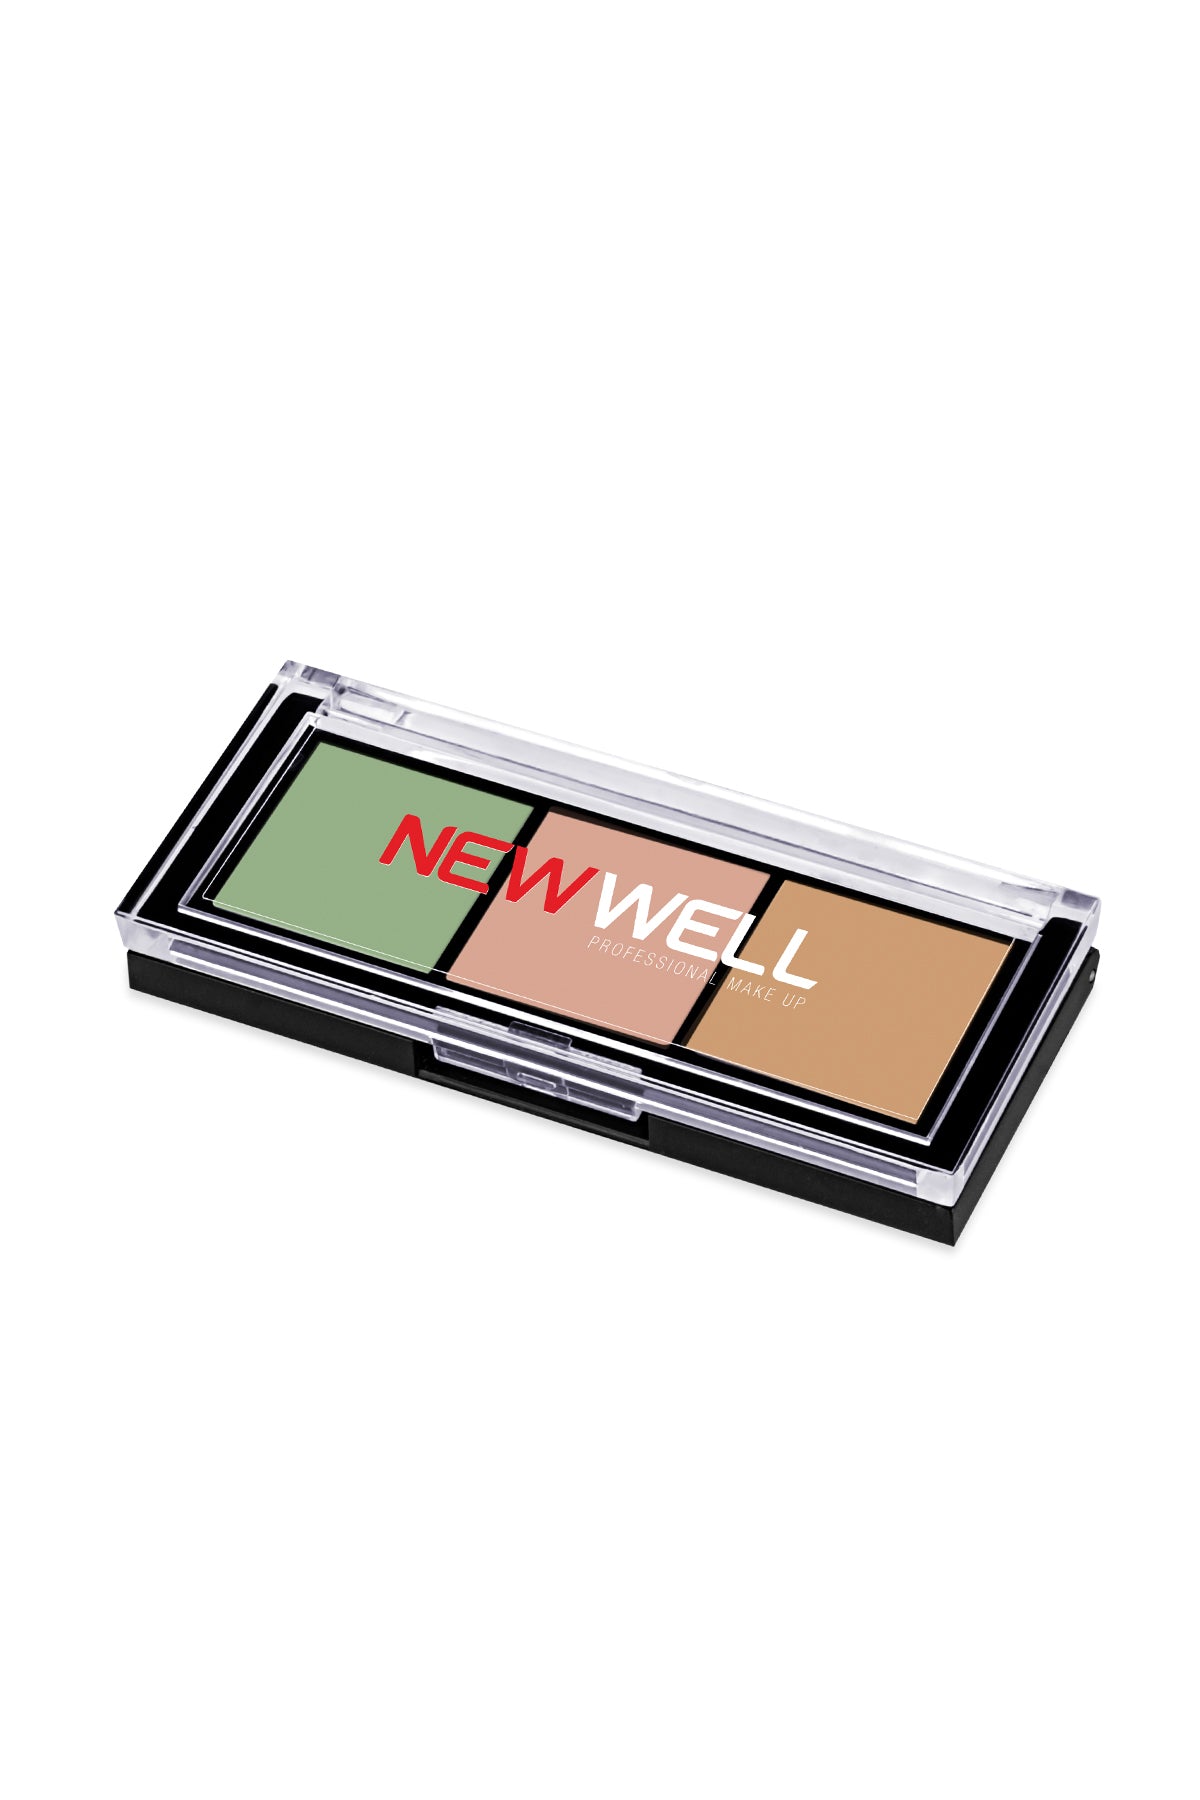 NEWWELL Concealer Camouflage 3 Colors 12gr.